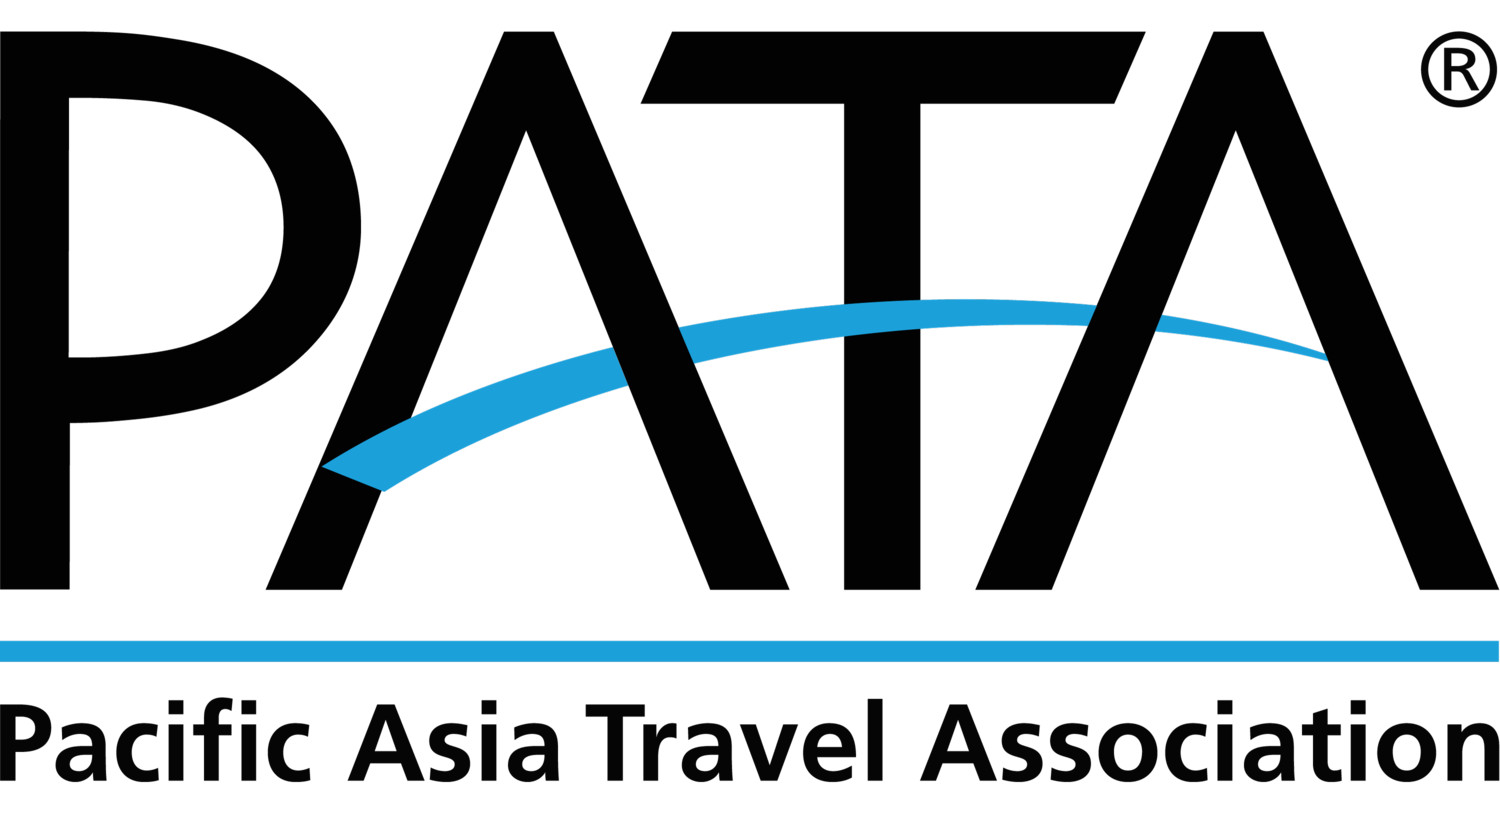 Pacific Asia Travel Association